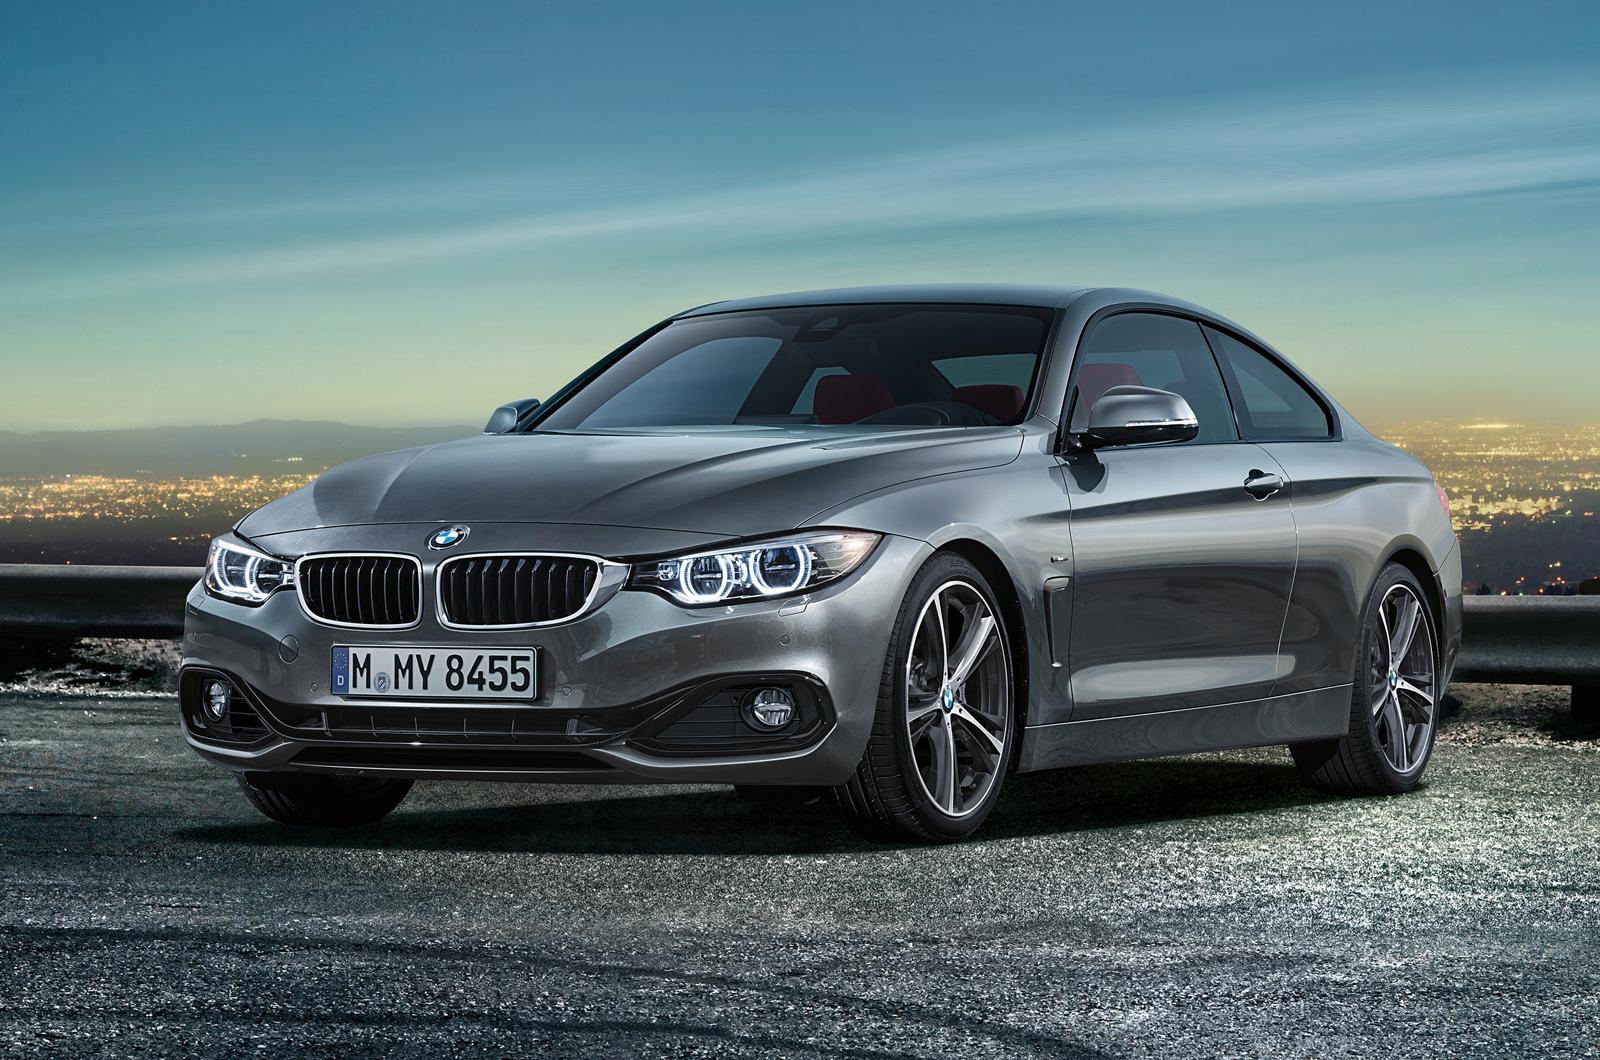 Update No BMW 4 Series ActiveHybrid coming to 2013 Los